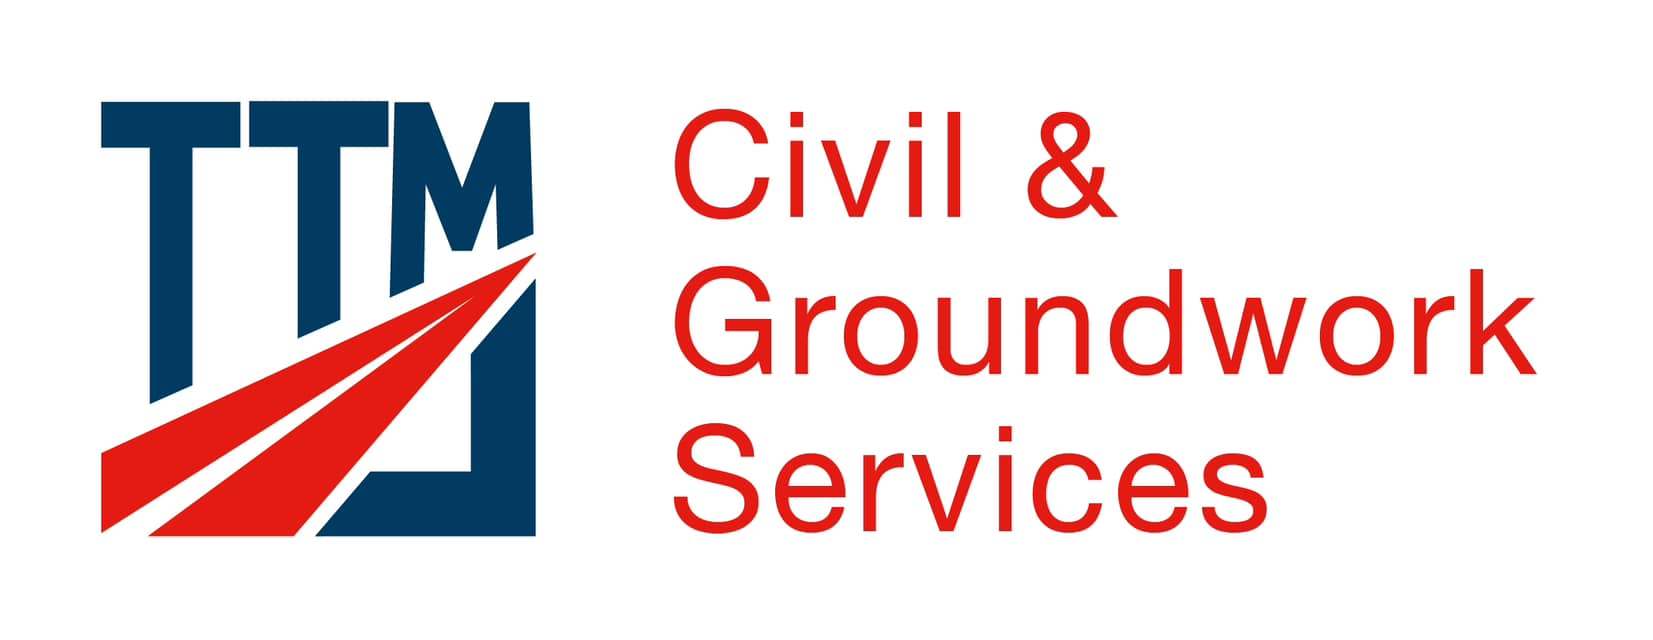 TTM logo with Civils & Groundwork Services text